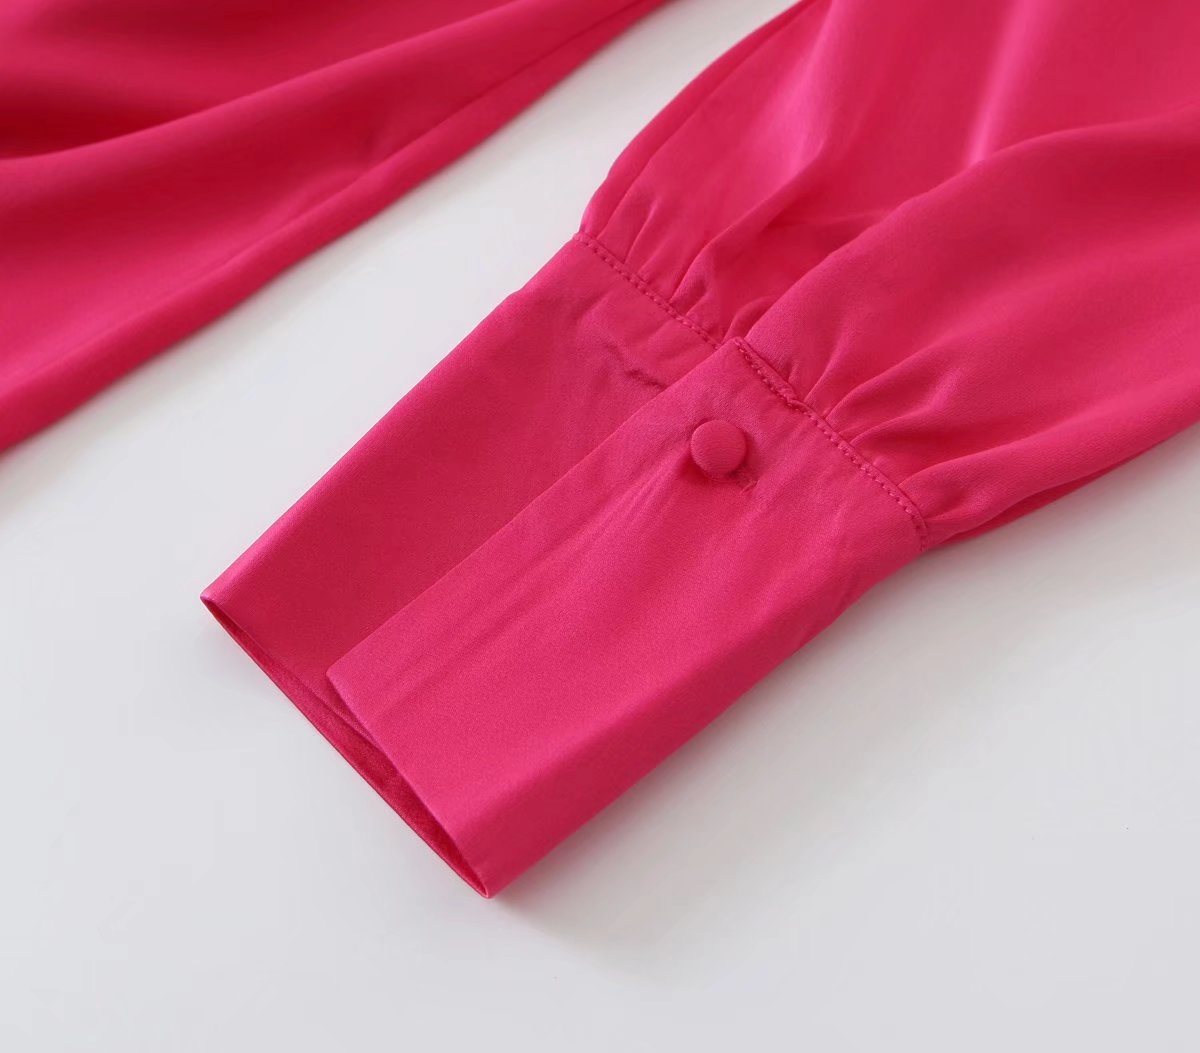 Elegant Silk Outfits | Hot Pink Aesthetic Silk Shirt and Hot Pink Pants